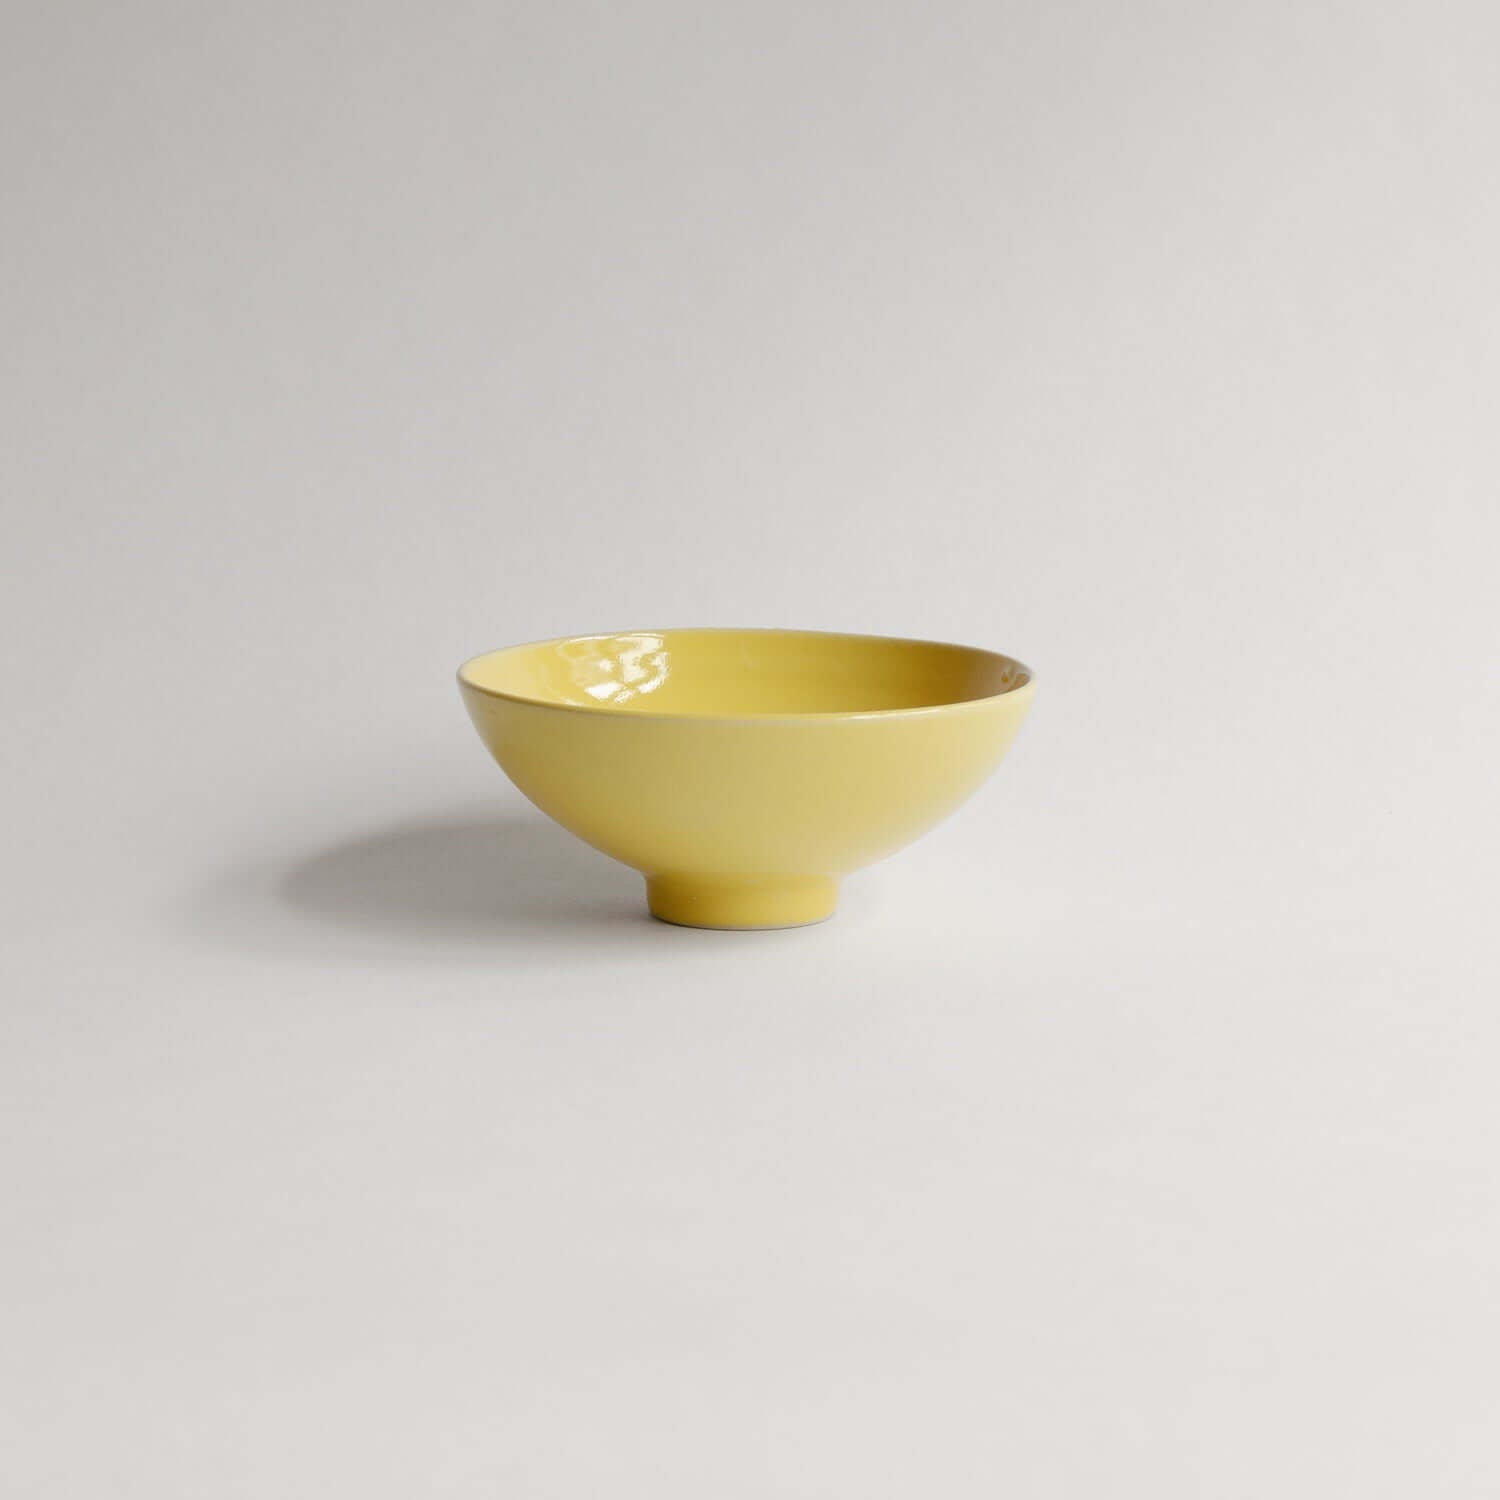 Shop our unique 13cm Yellow Bowl, handcrafted from grey stoneware with a yellow glaze. Each piece is a one-of-a-kind symbol of love from our studio. von viola beuscher ceramics